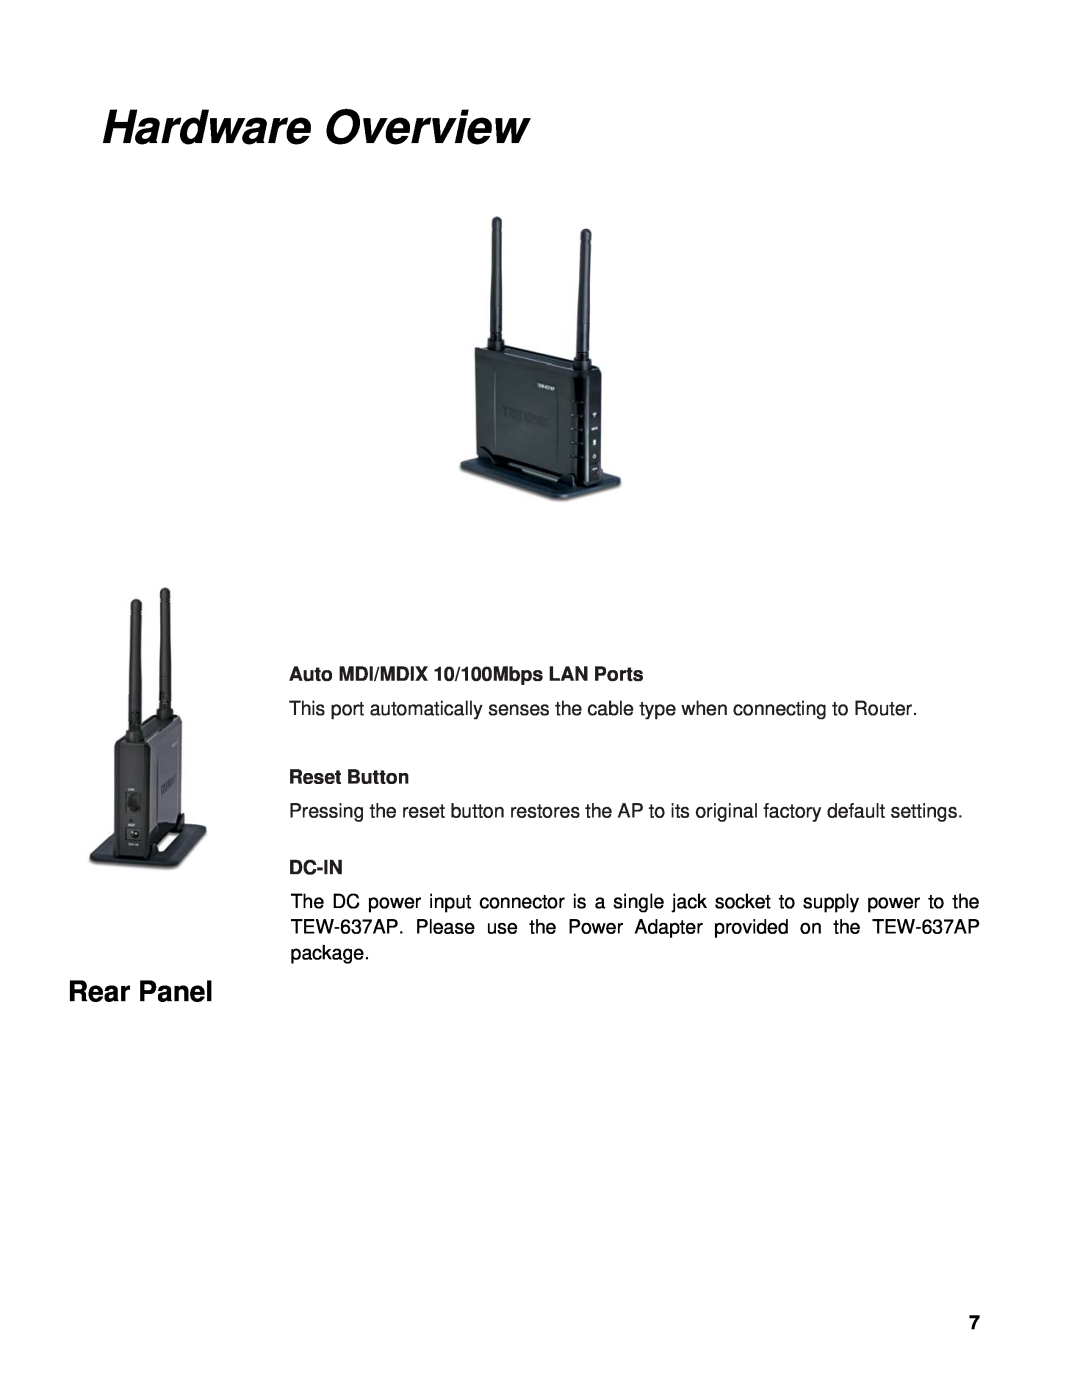 TRENDnet TEW-637AP manual Hardware Overview, Rear Panel, Auto MDI/MDIX 10/100Mbps LAN Ports, Reset Button, Dc-In 